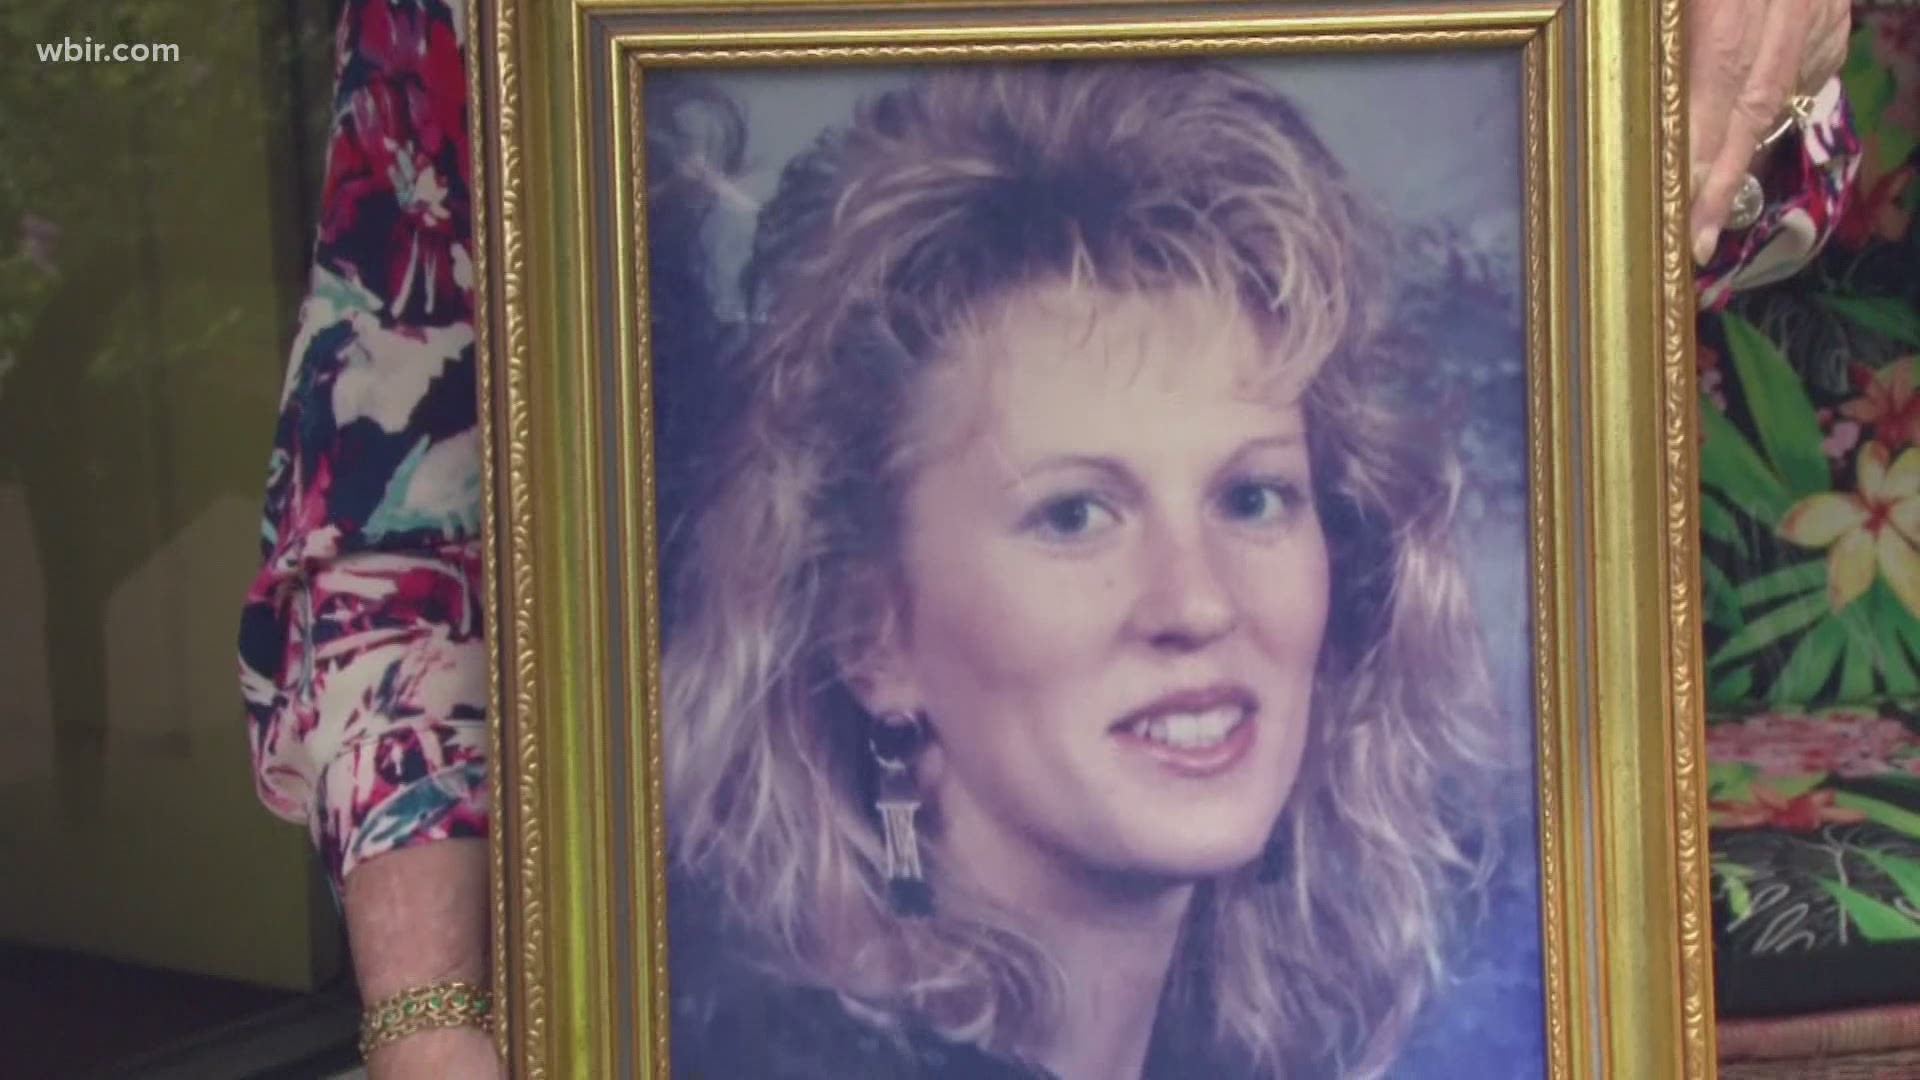 Thirty years cannot heal a broken heart. That's how long its been since someone murdered Jennifer Bailey, days before her 22nd birthday.